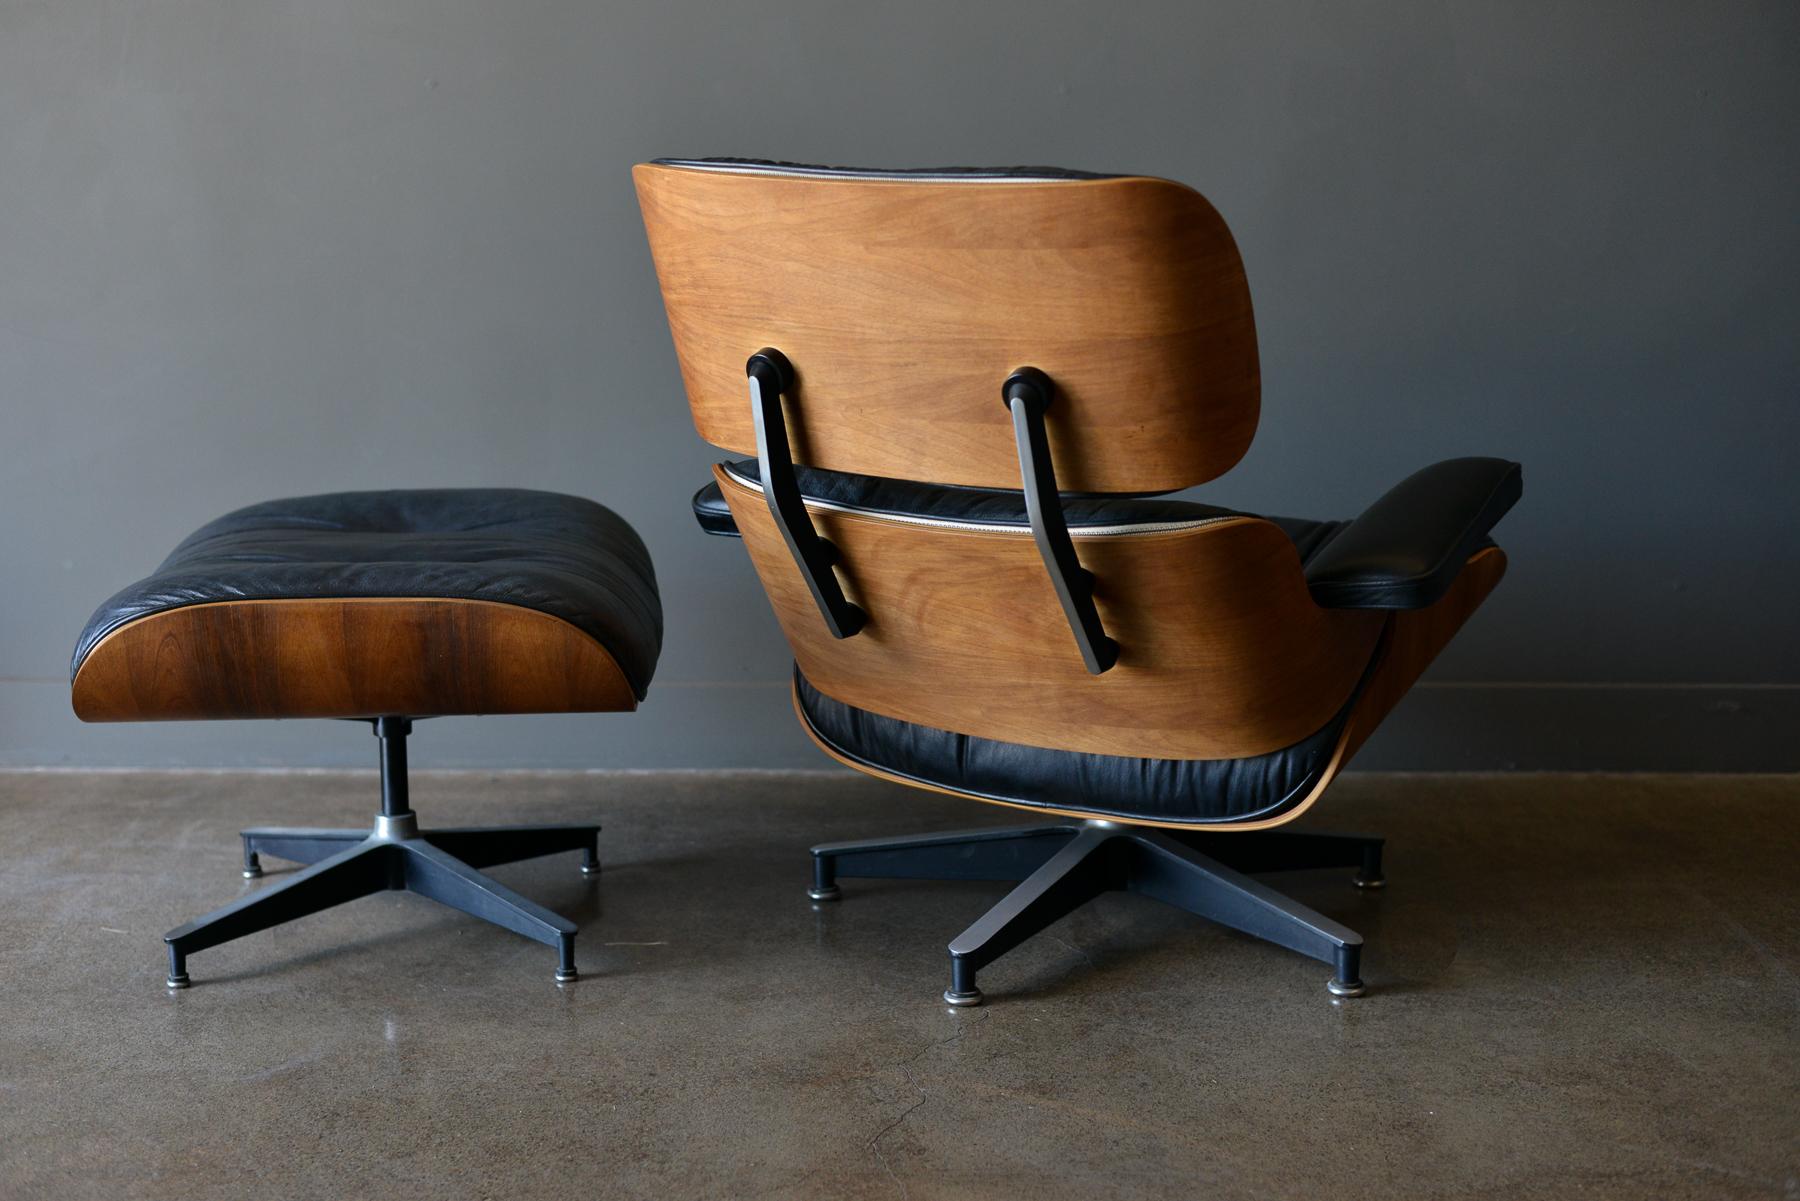 Eames rosewood lounge chair and ottoman, circa 1971. Original Charles Eames 670 and 671 lounge chair and ottoman for Herman Miller in black leather and rosewood. Beautiful patina to the leather, original 5 star base with domes of silence floor